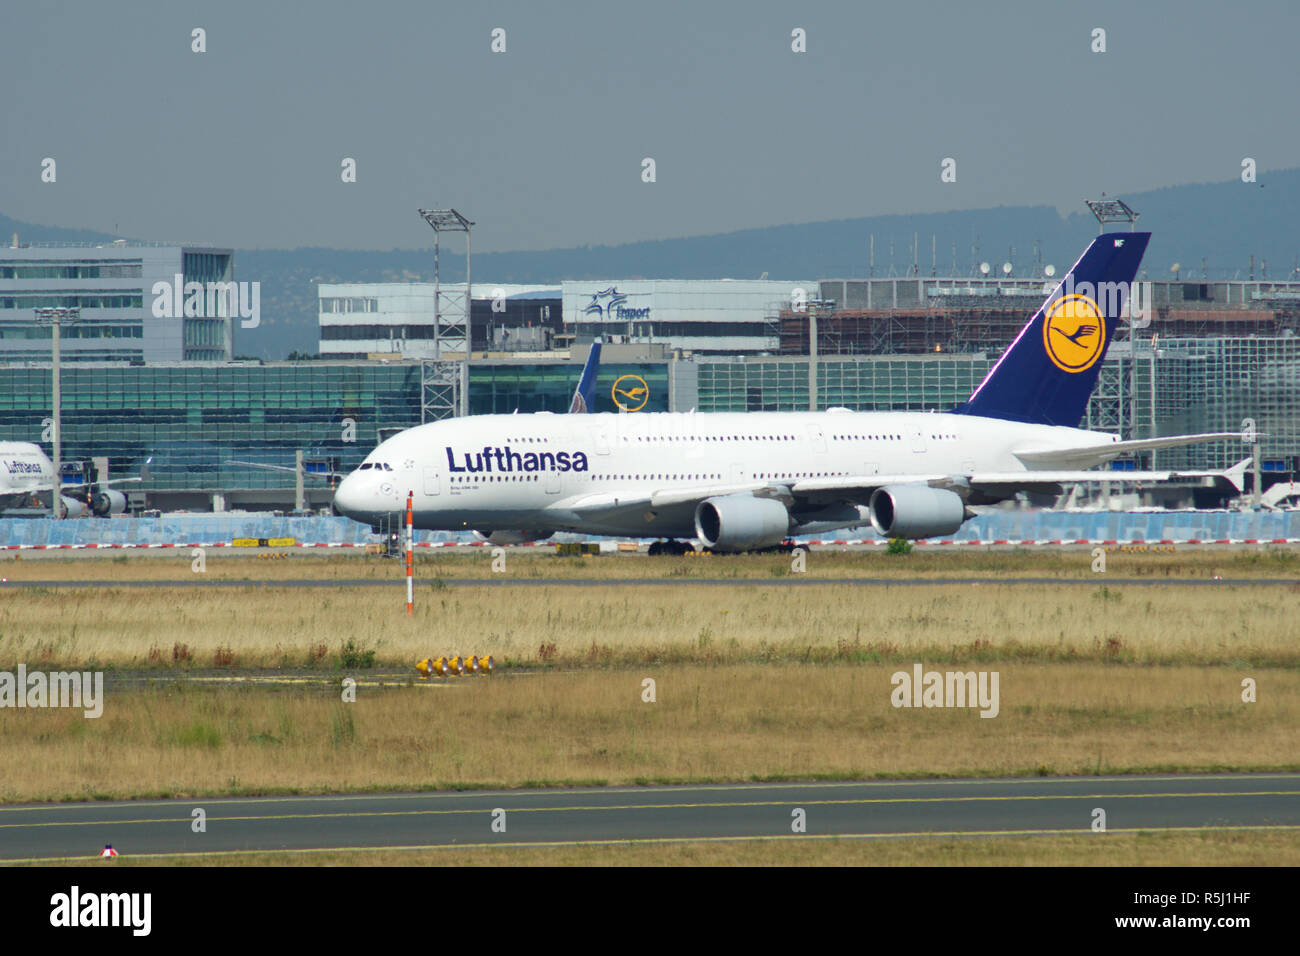 FRANKFURT, GERMANY - JUN 09th, 2017: Lufthansa Airbus A380 MSN 66 - D-AIMF aircraft taxiing on the airport. A380 is the flagship of Lufthansa airplane fleet Stock Photo